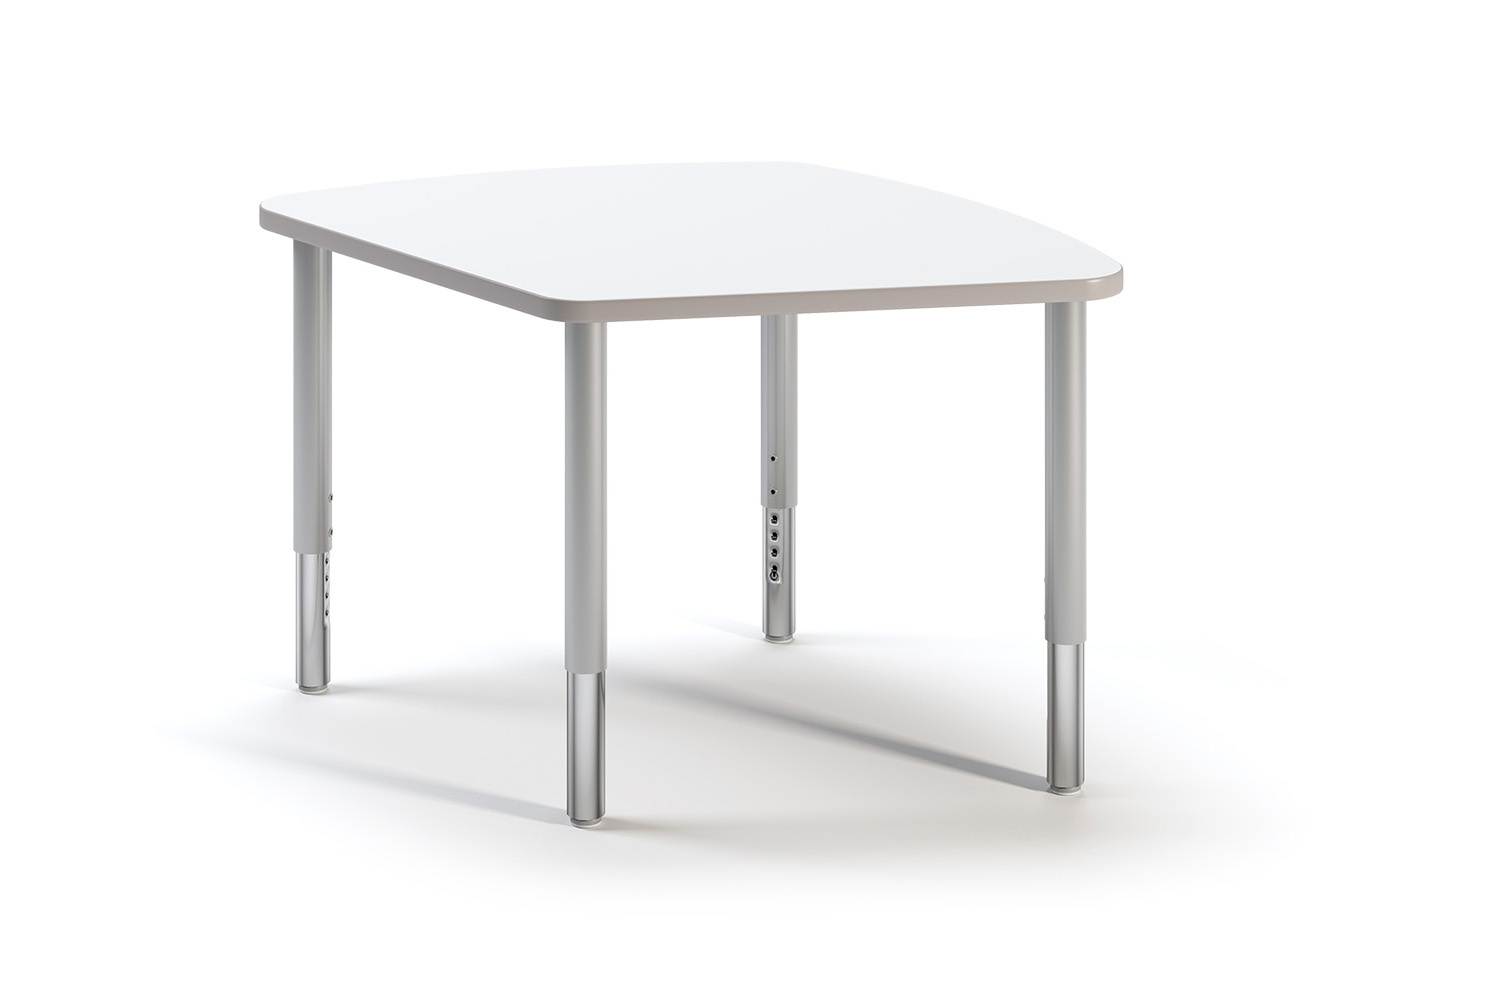 Mingle Tilted Square Table, white table top